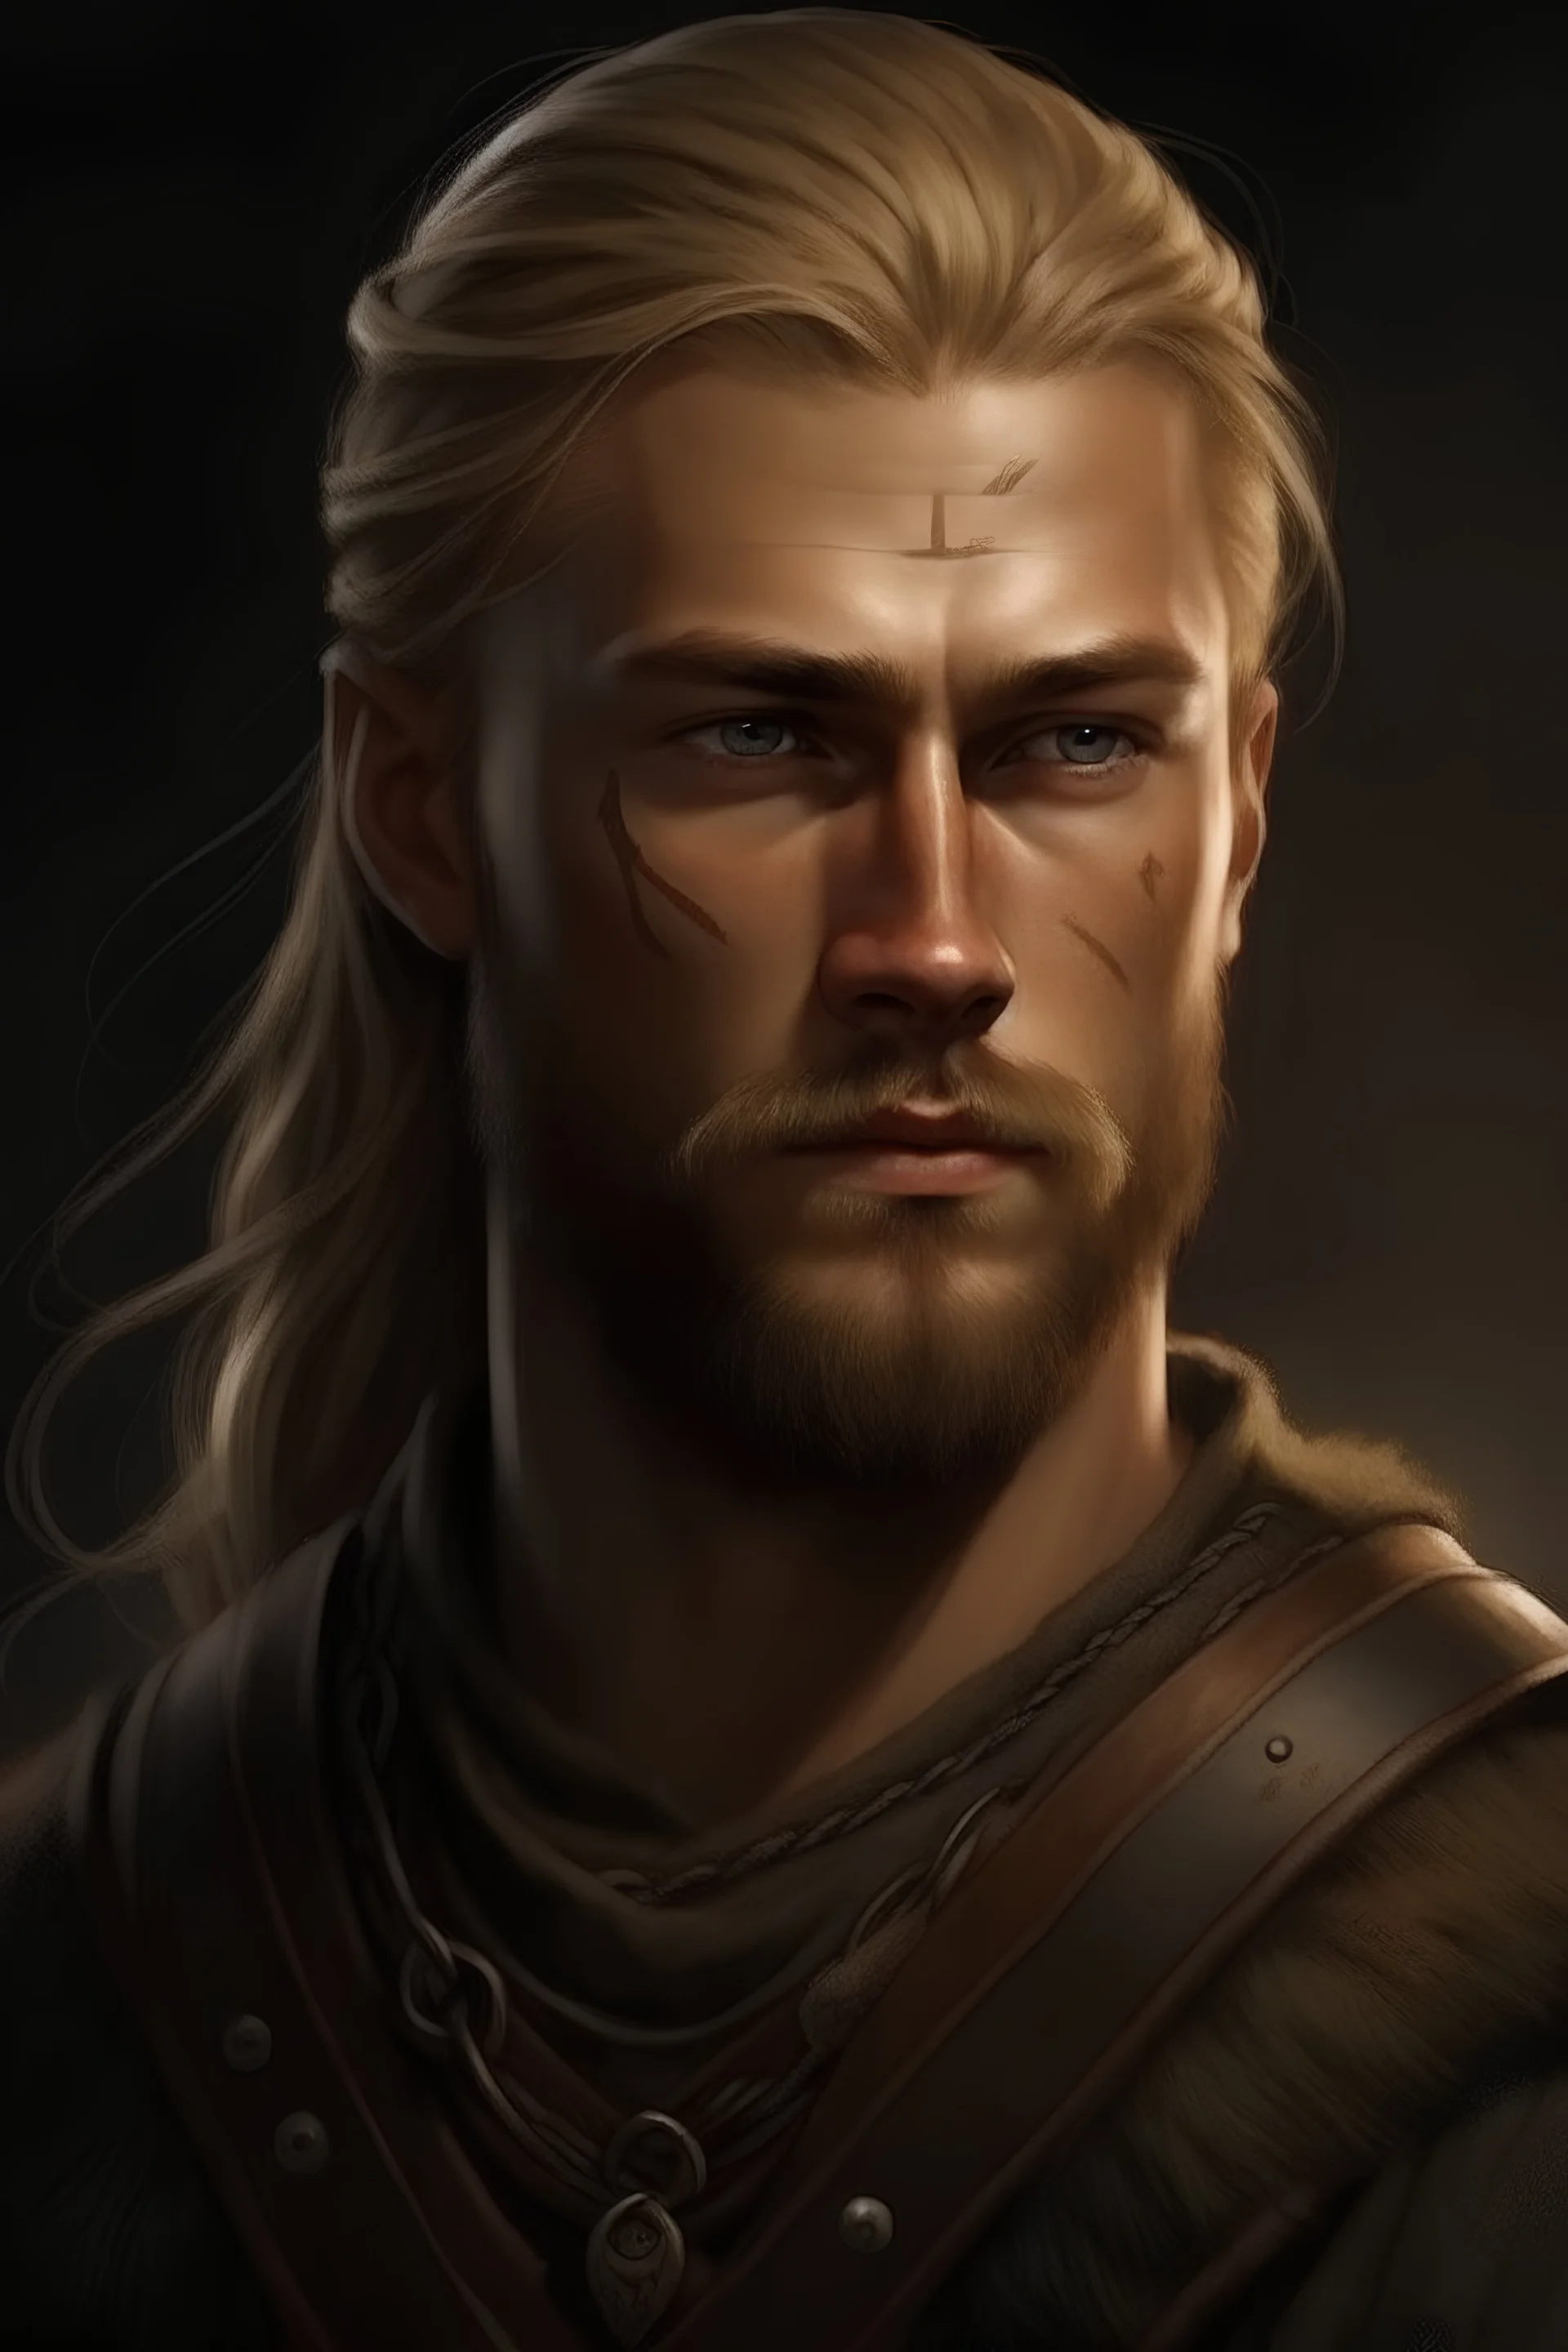 a very buetiful viking like man but realistic and young. With light hair